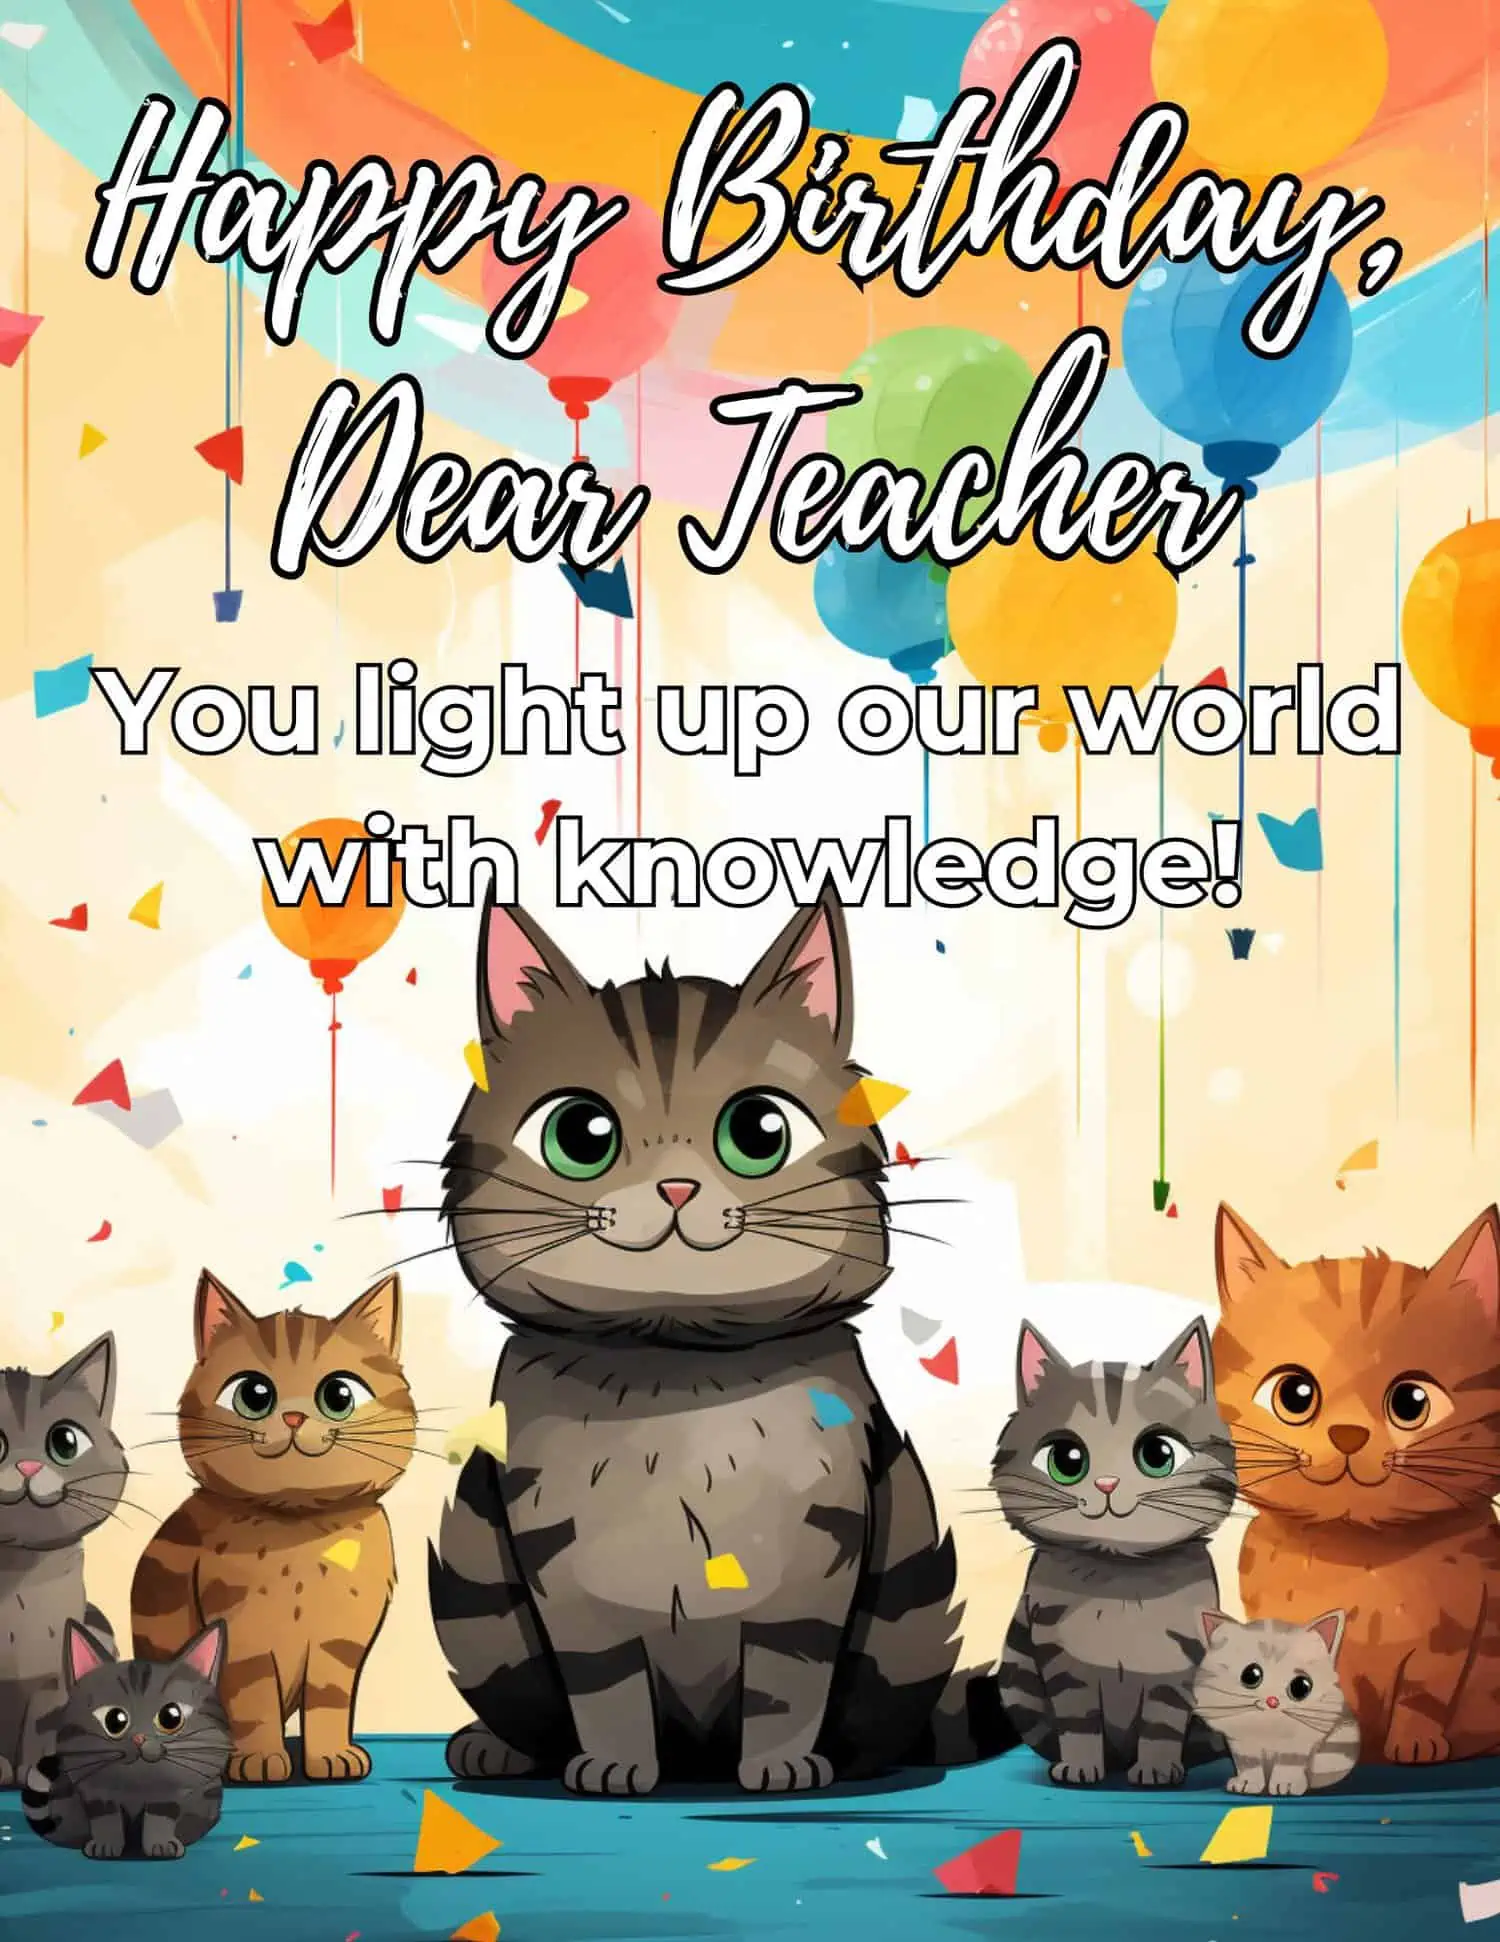 A modern twist to birthday messages, combining heartfelt words with playful emojis to convey warm wishes to educators.